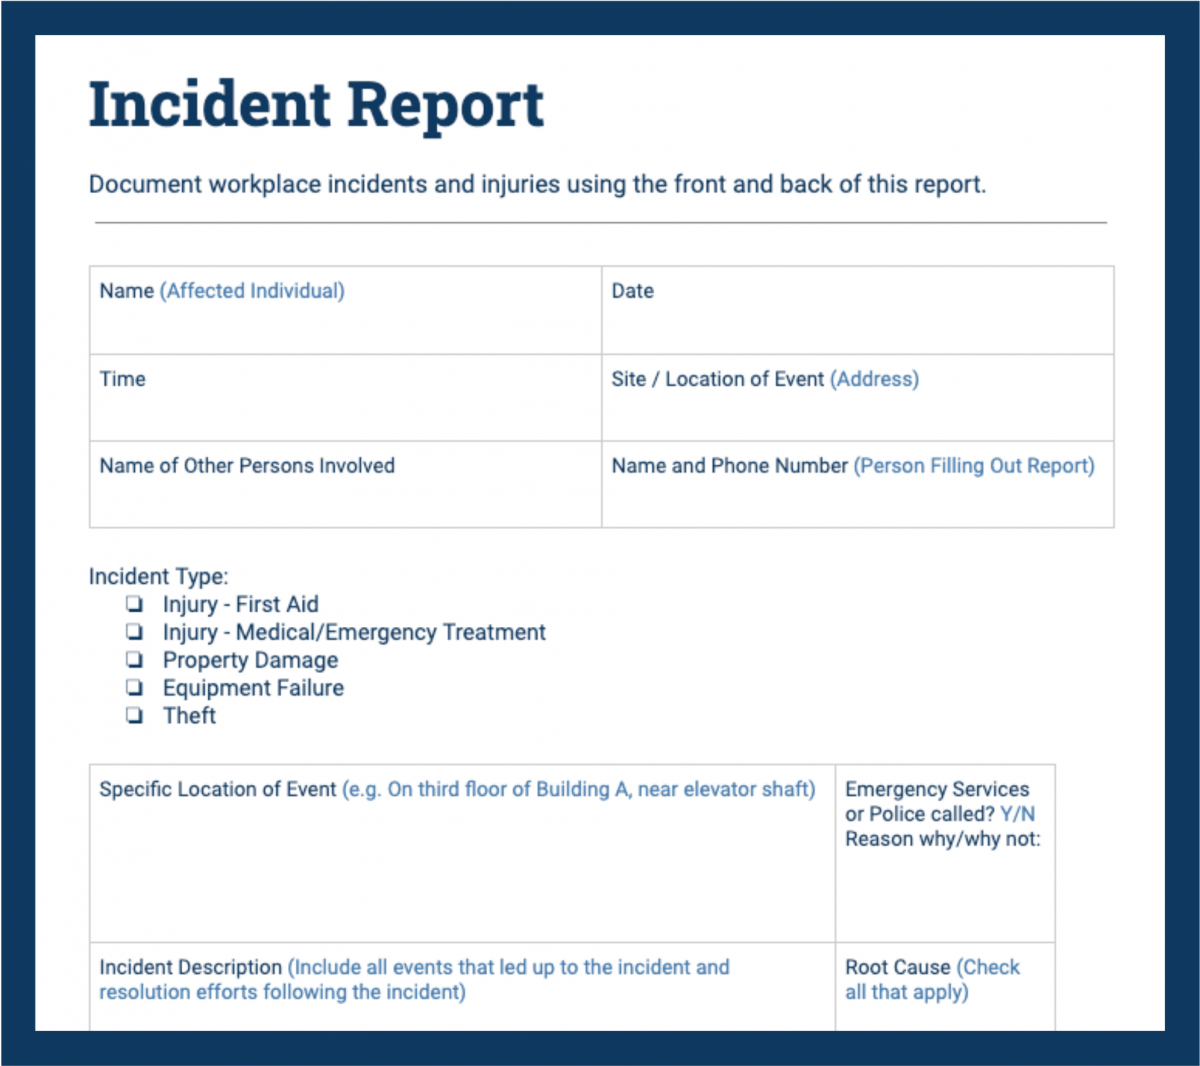 Incident Report Samples to Help You Describe Accidents - Safesite Inside Construction Accident Report Template